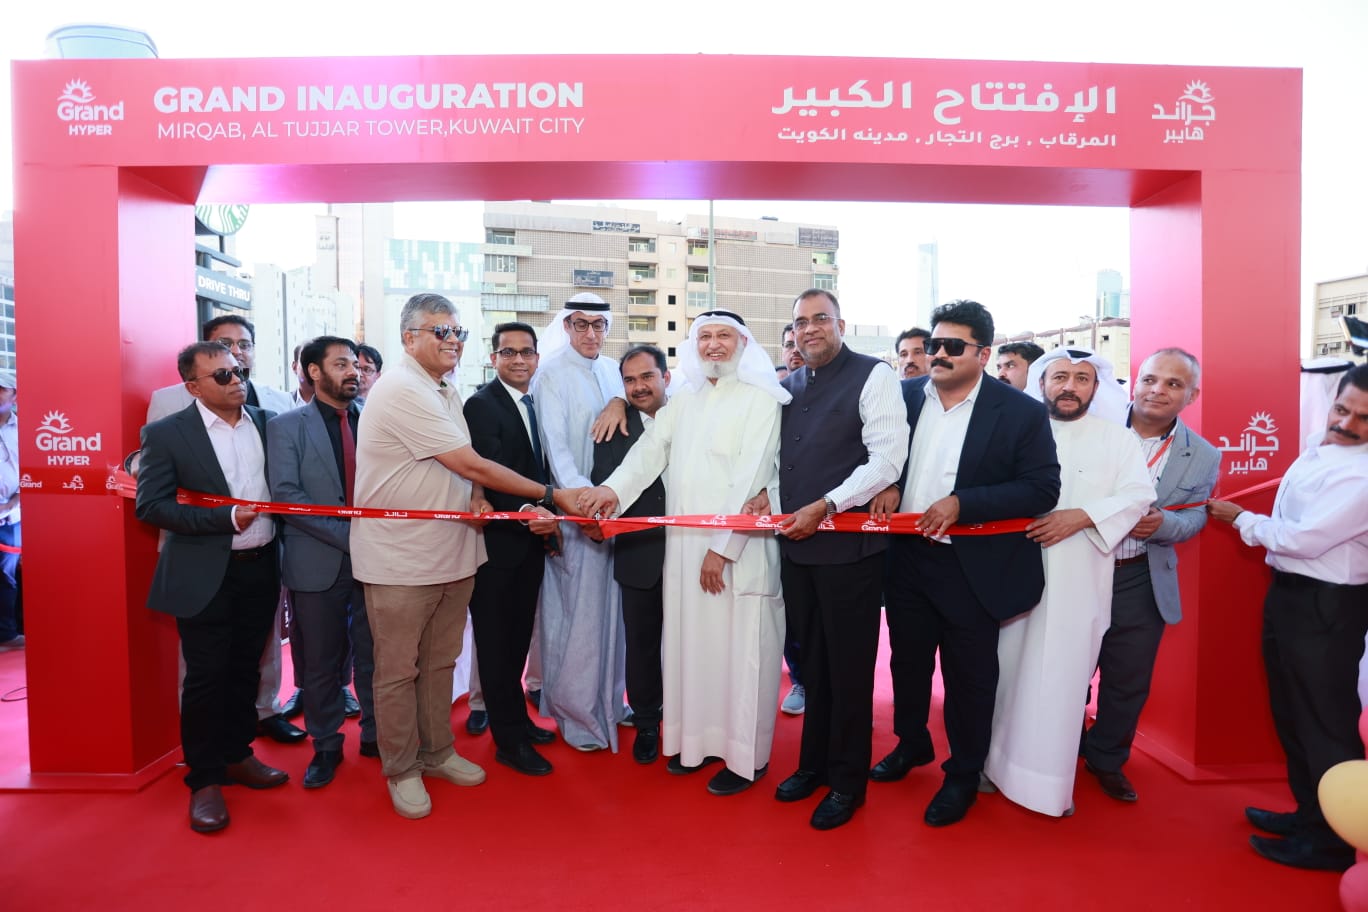 Grand Hyper opens its 37th branch at Mirqab, Kuwait City